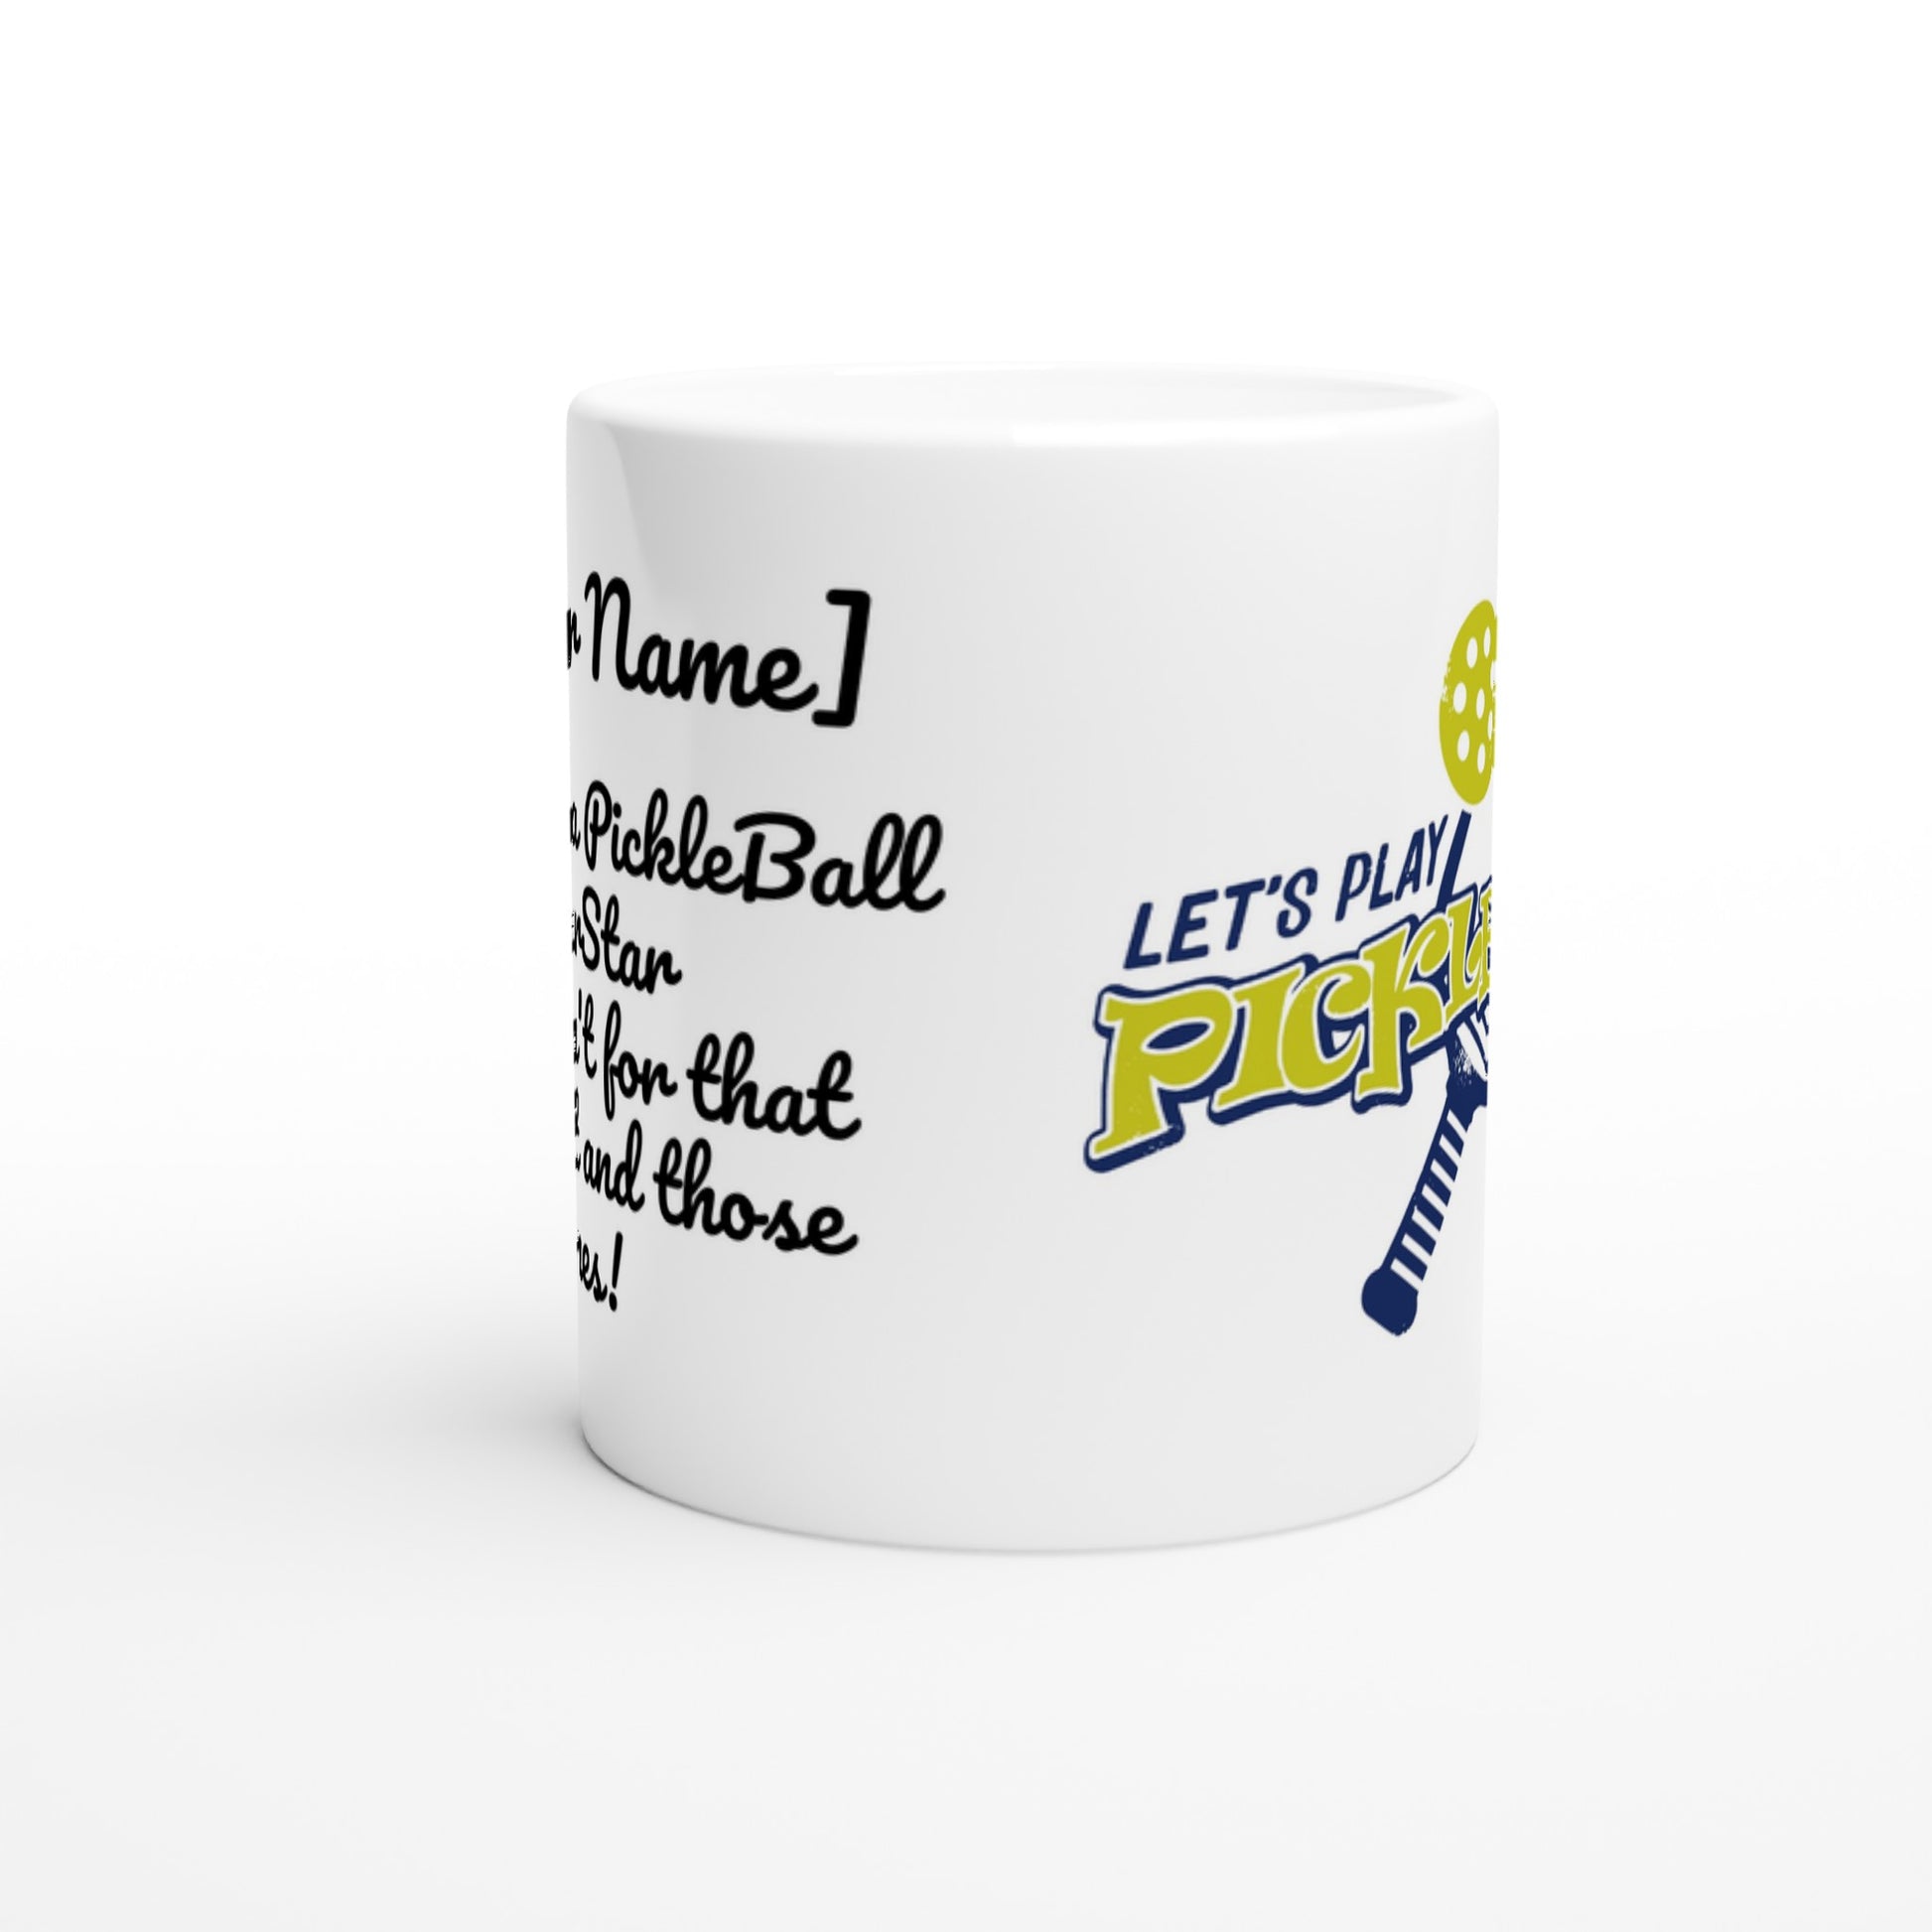 Personalized White ceramic 11oz mug with white handle Personalized with motto Your Name Would be a PickleBall Superstar if it wasn’t for that Darn net and those lines front side Let's Play PickleBall logo on back dishwasher and microwave safe ceramic coffee mug from WhatYa Say Apparel side view.